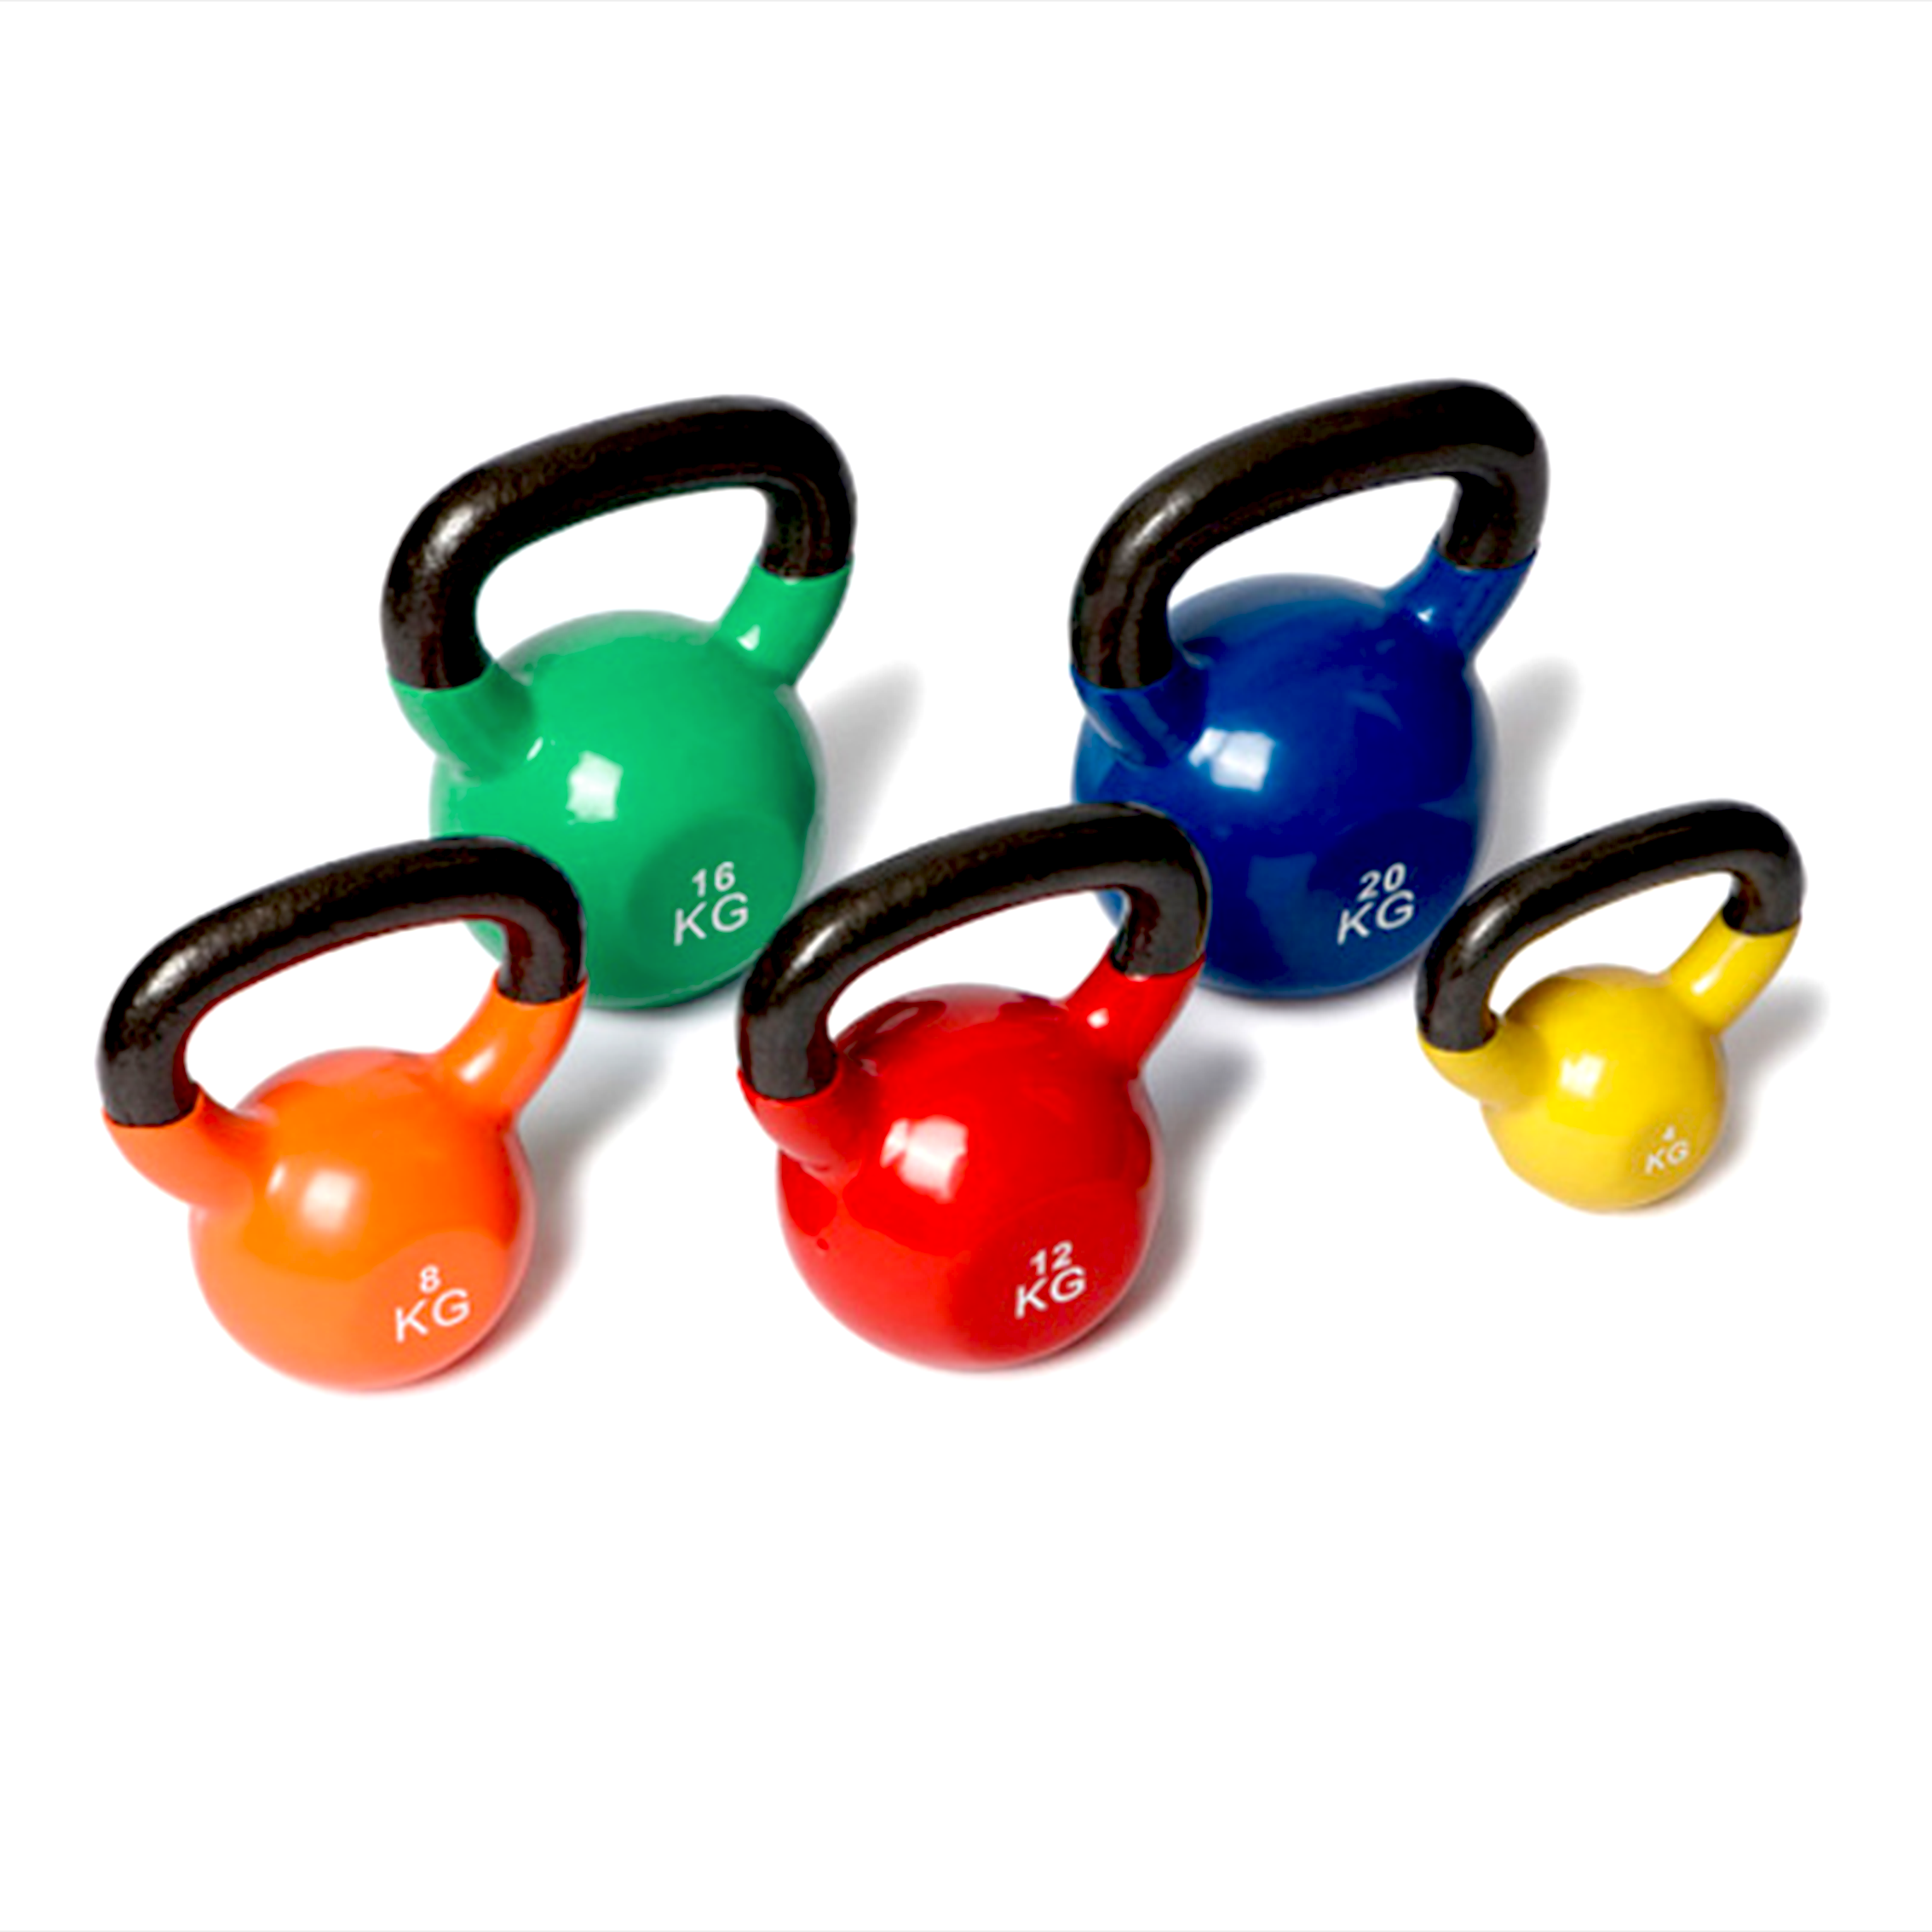 Colorful Vinyl Rubber Coated kettlebell